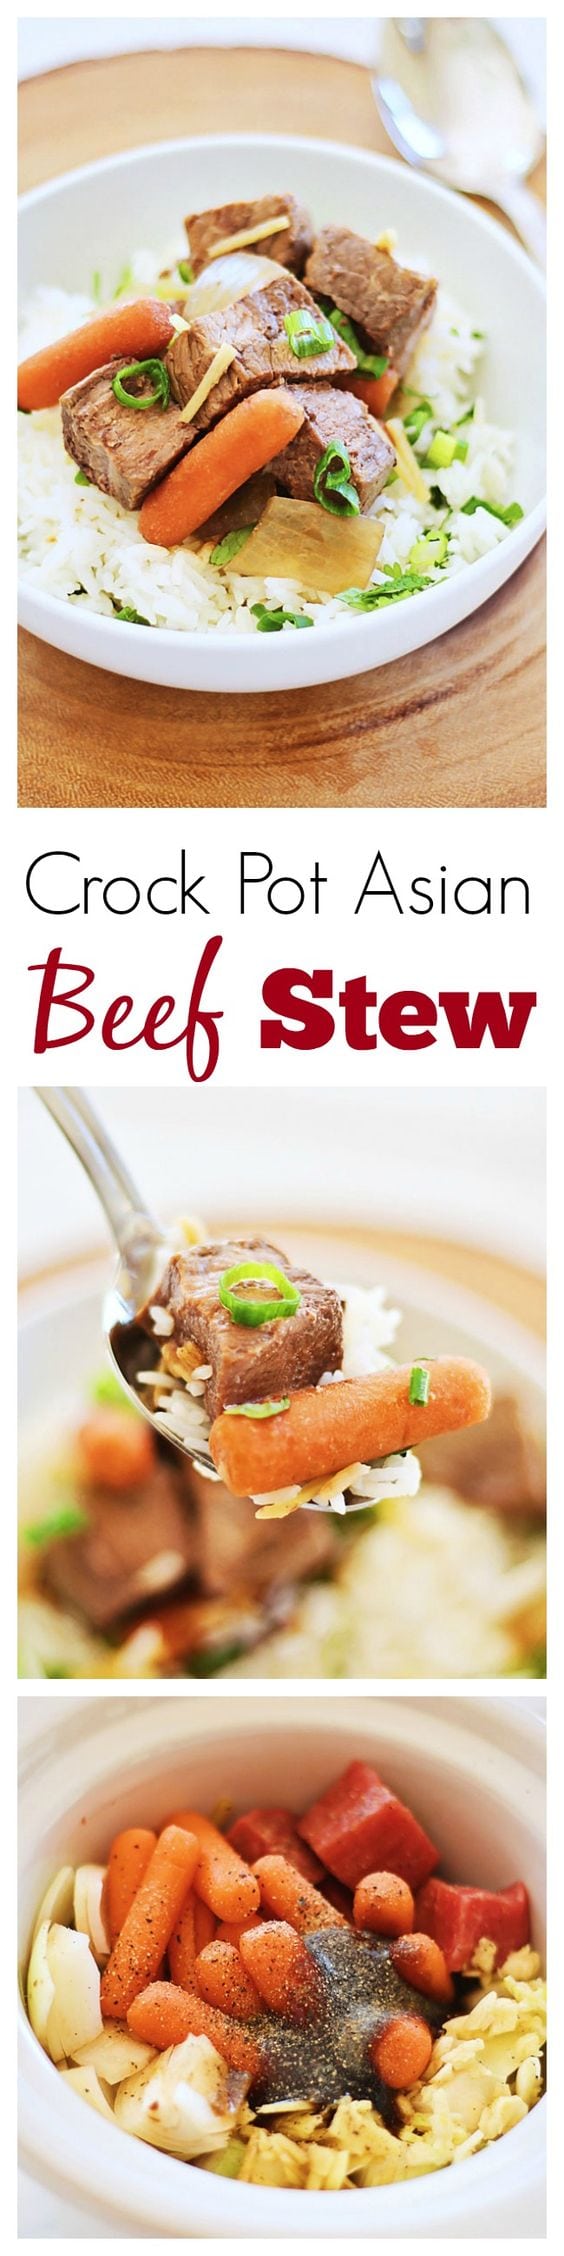 Crock Pot Asian Beef Stew – easy Asian beef stew in a crock pot. Quick and delicious one pot meal that you can make for the entire family | rasamalaysia.com